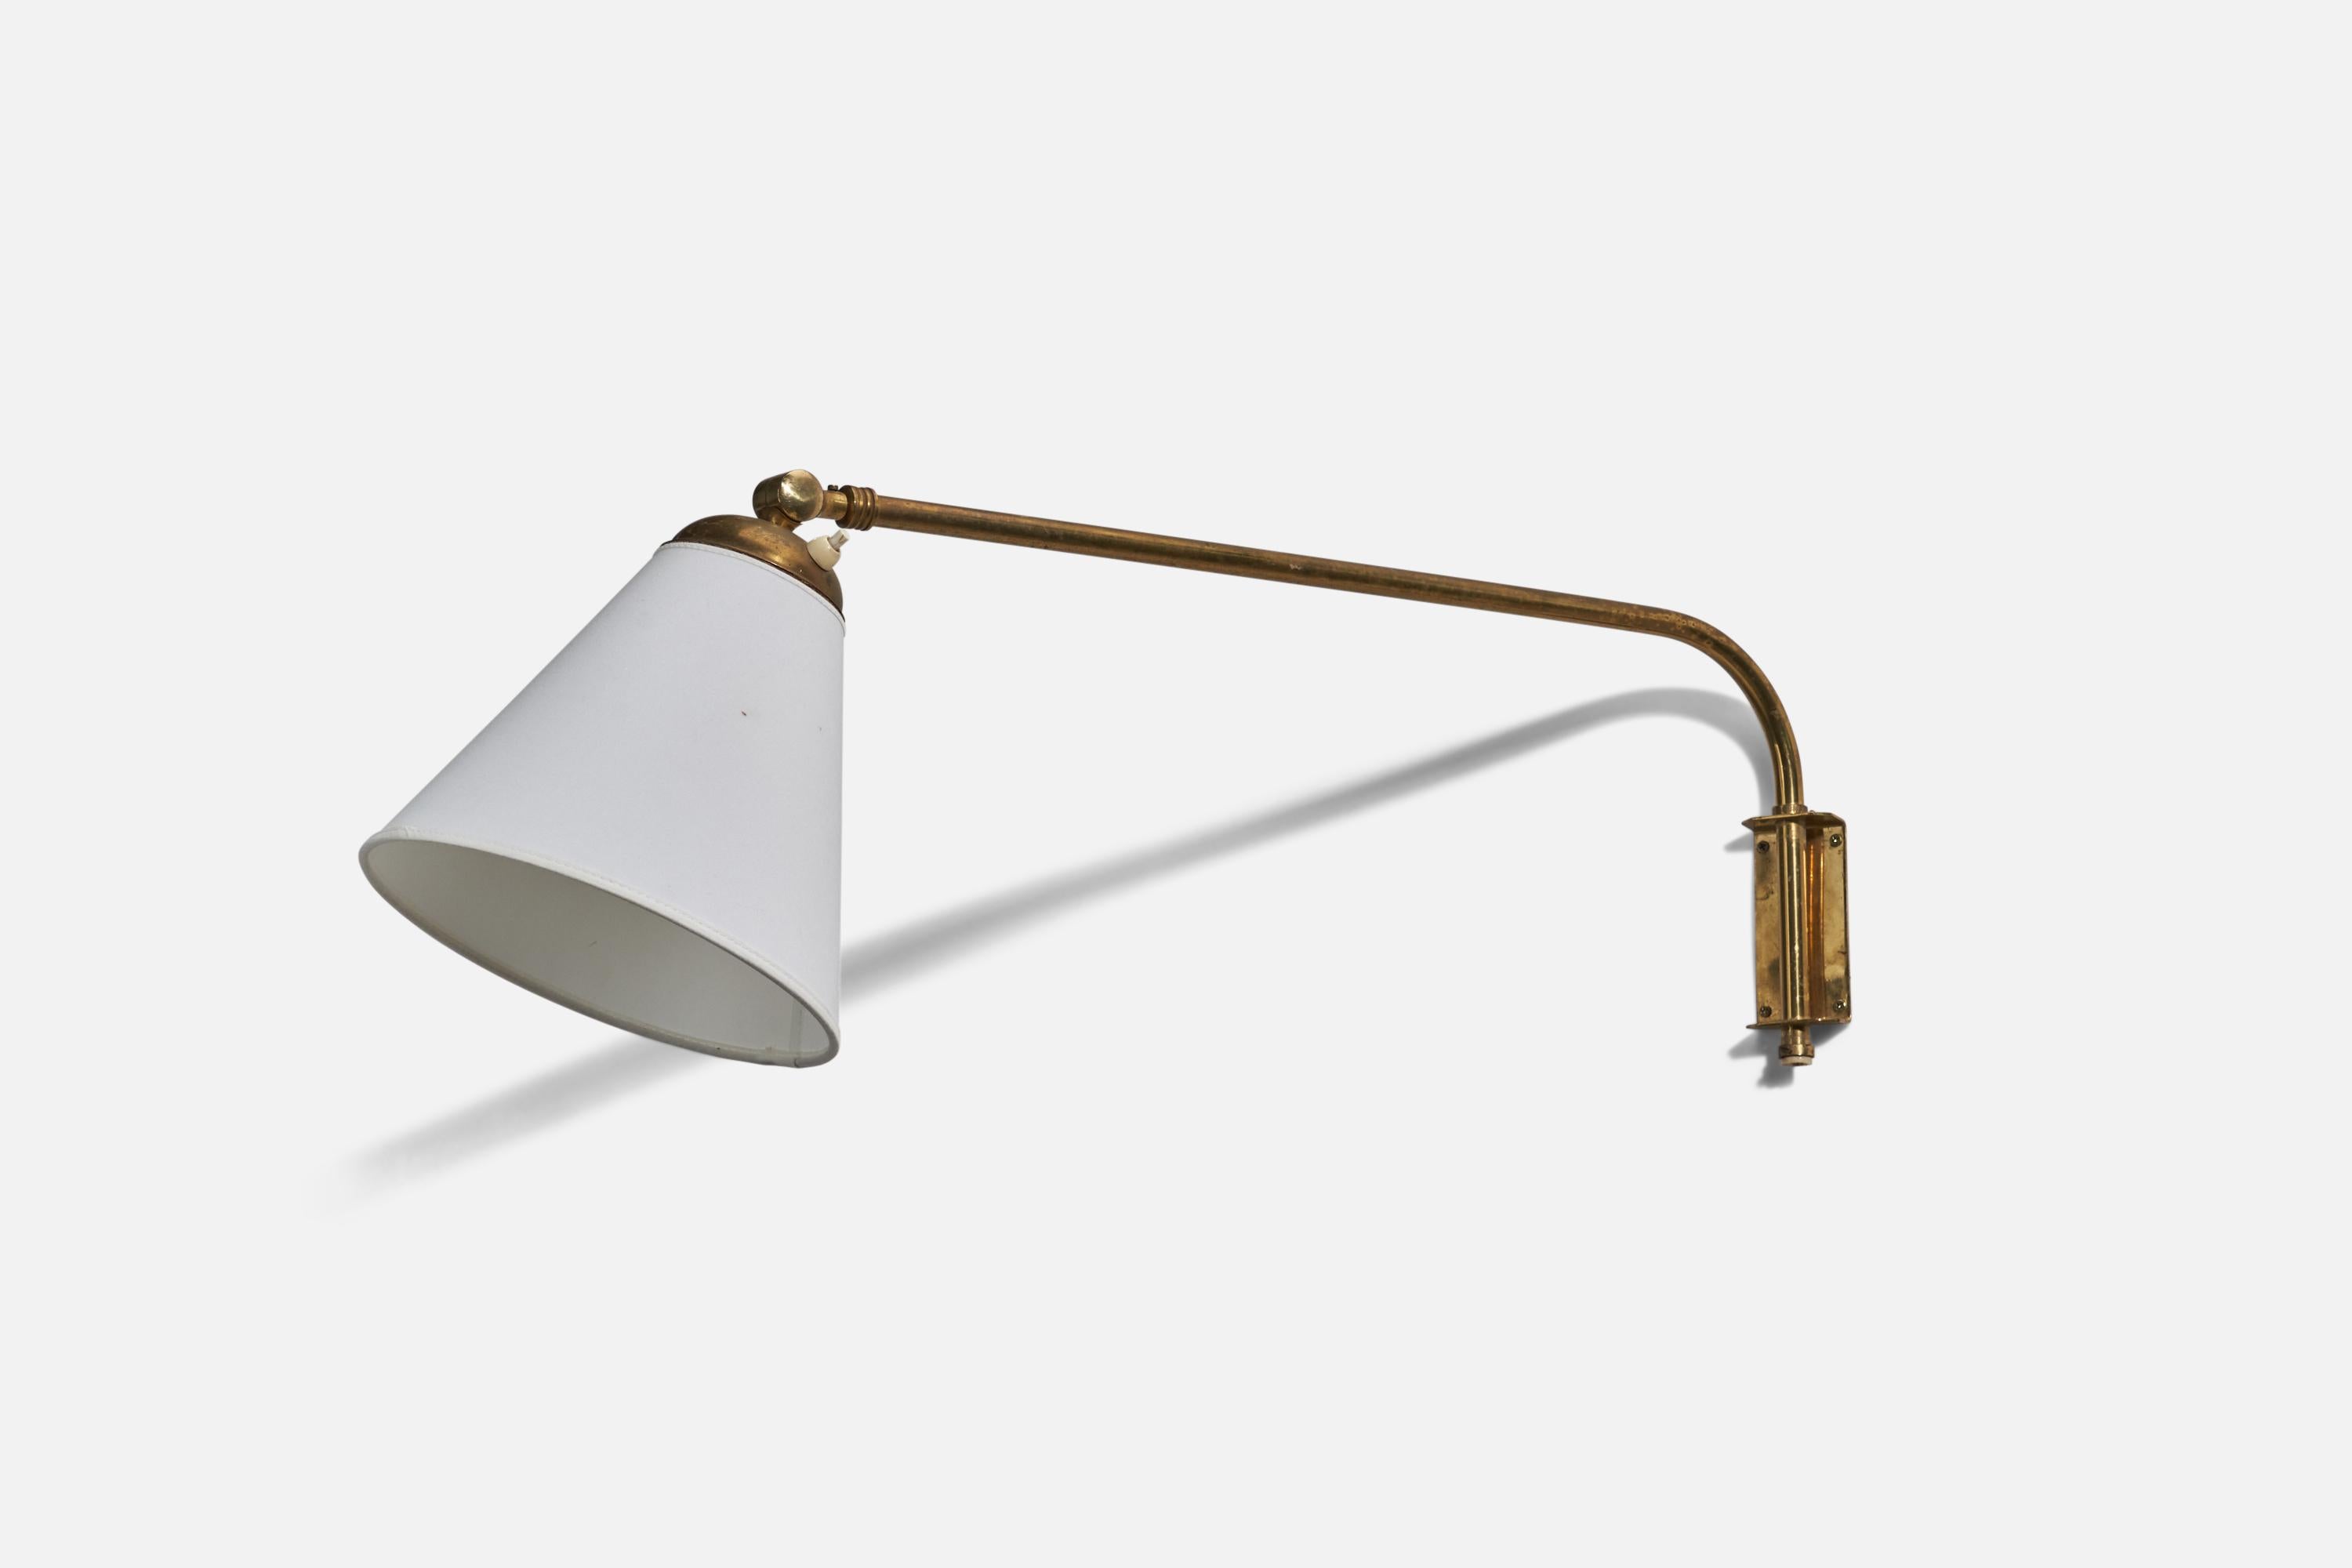 A fabric and brass sconce designed and produced in Sweden, 1940s. 

Dimensions variable, measured as illustrated in first image.

Sold with lampshade. Dimensions stated are of sconce with lampshade.

Dimensions of back plate (inches) : 4.12 x